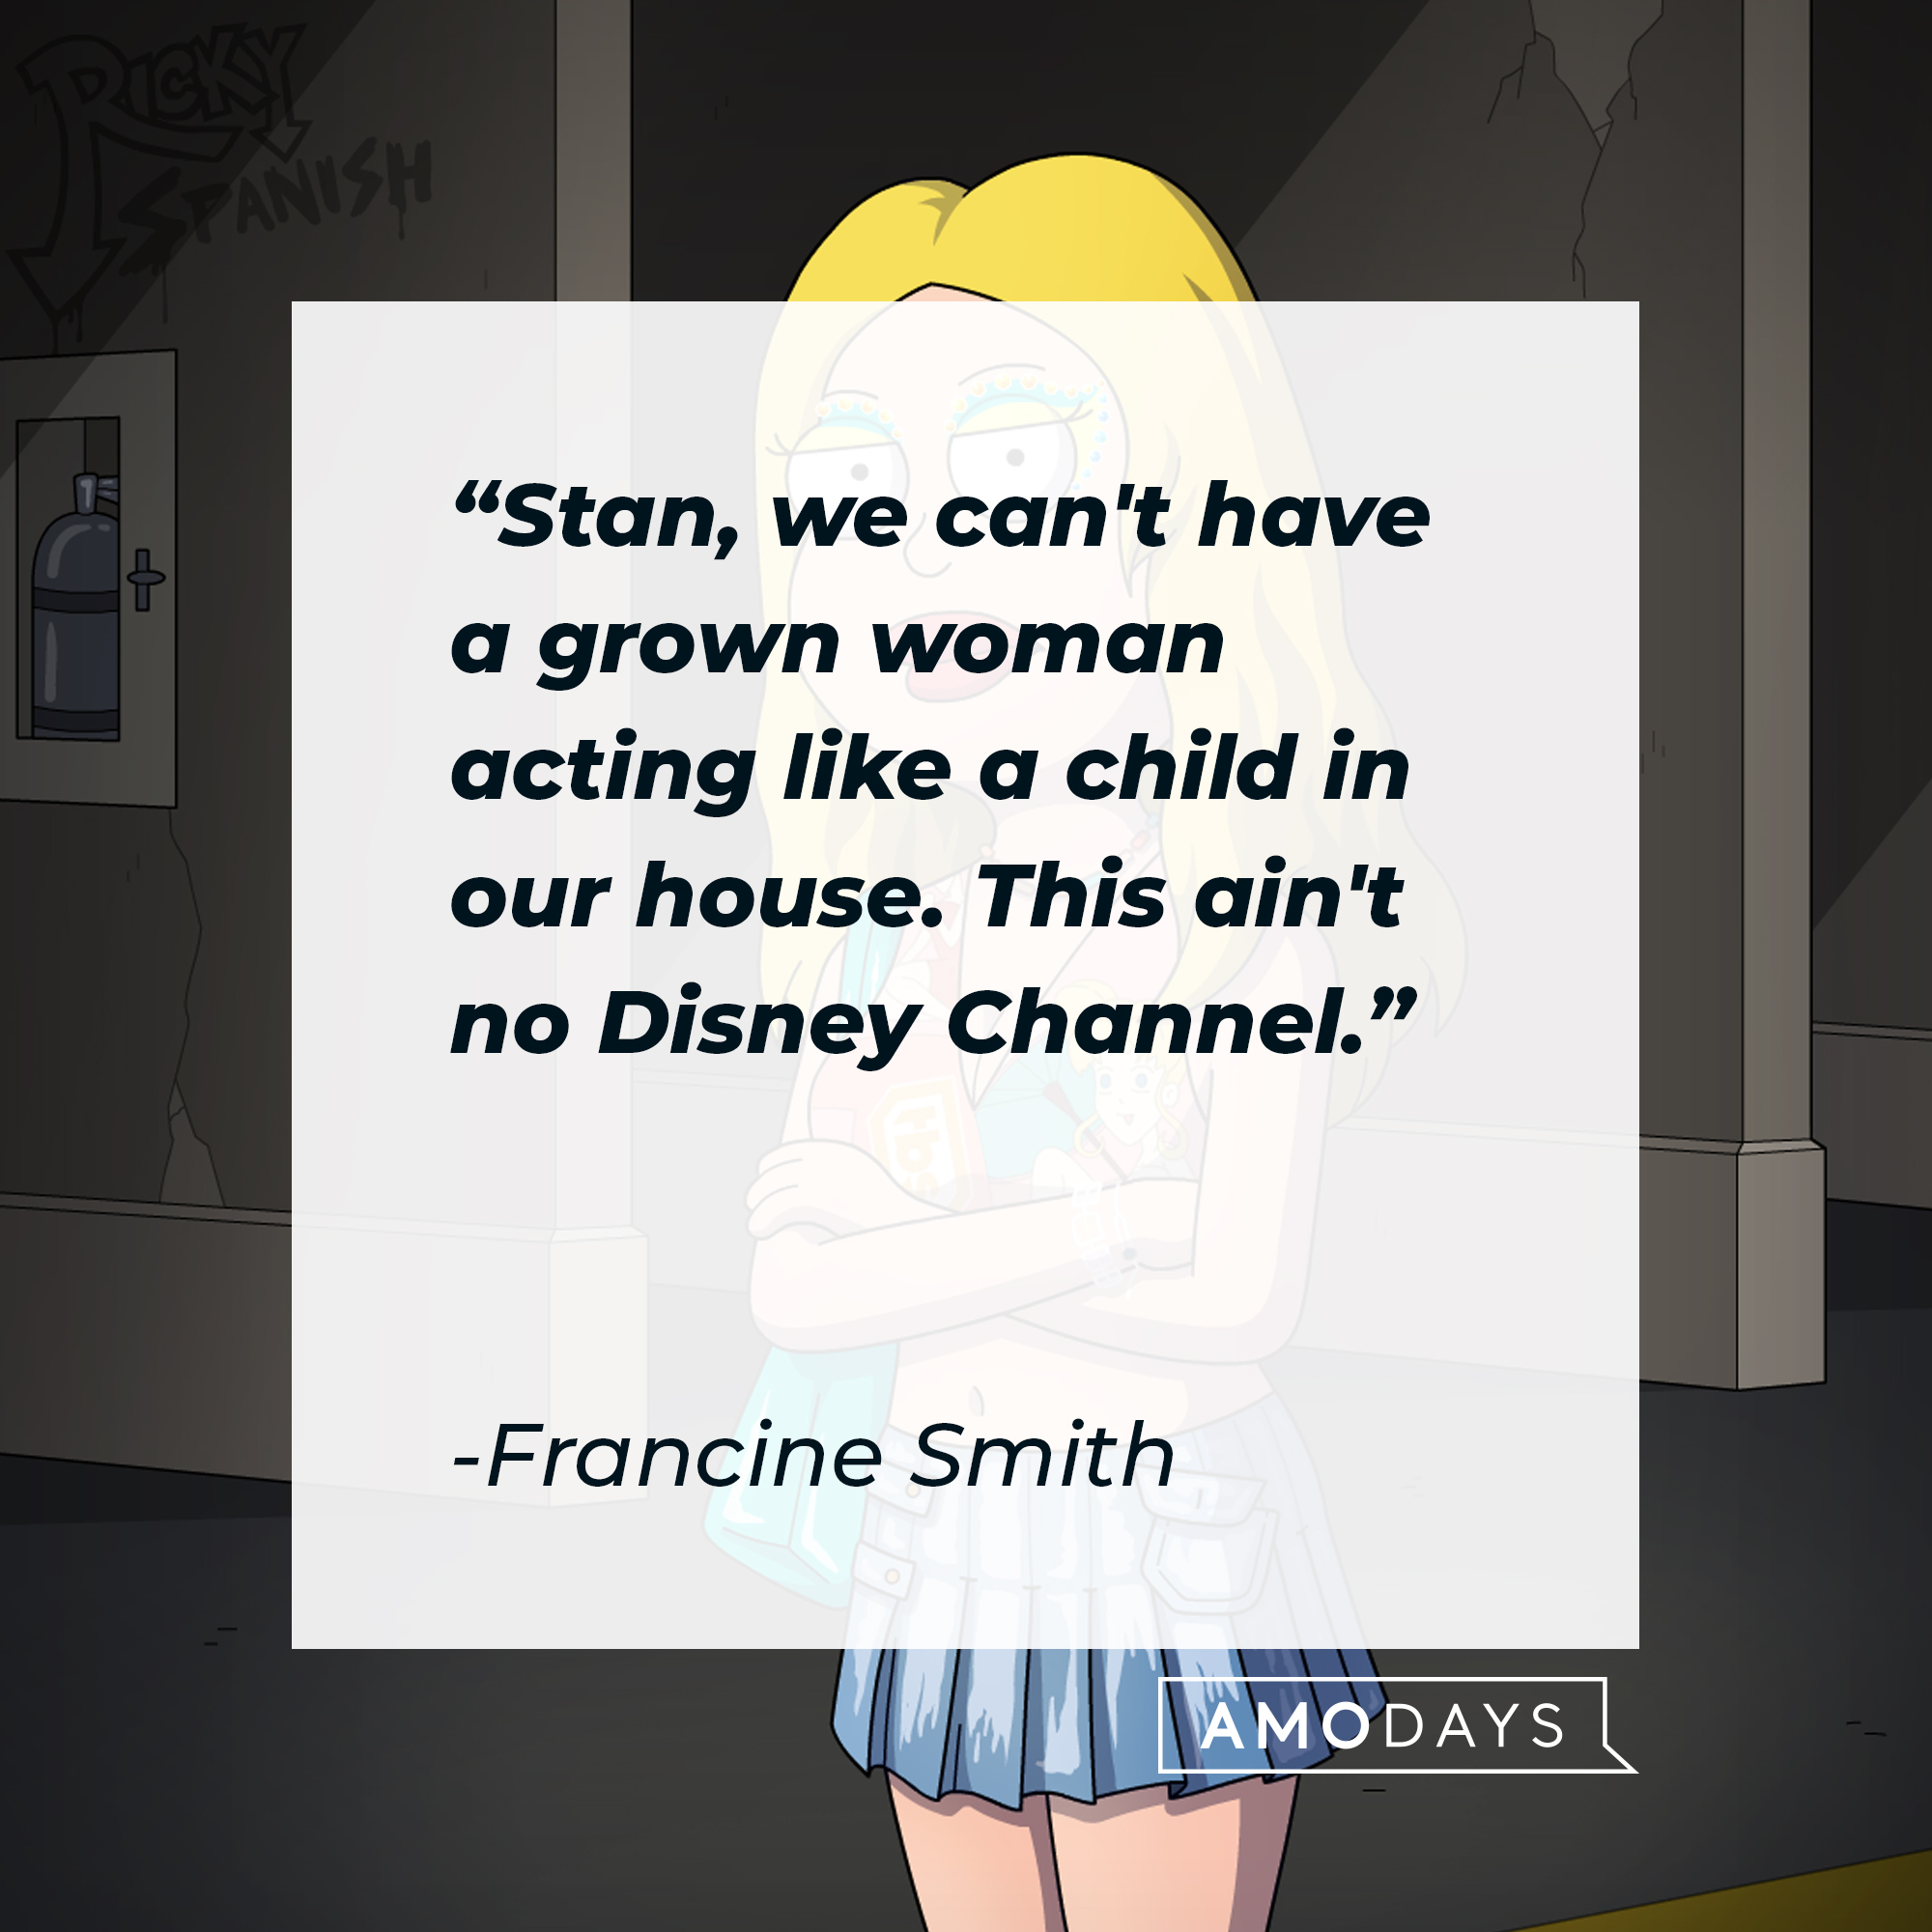 Francine Smith's quote: "Stan, we can't have a grown woman acting like a child in our house. This ain't no Disney Channel." | Source: facebook.com/AmericanDad